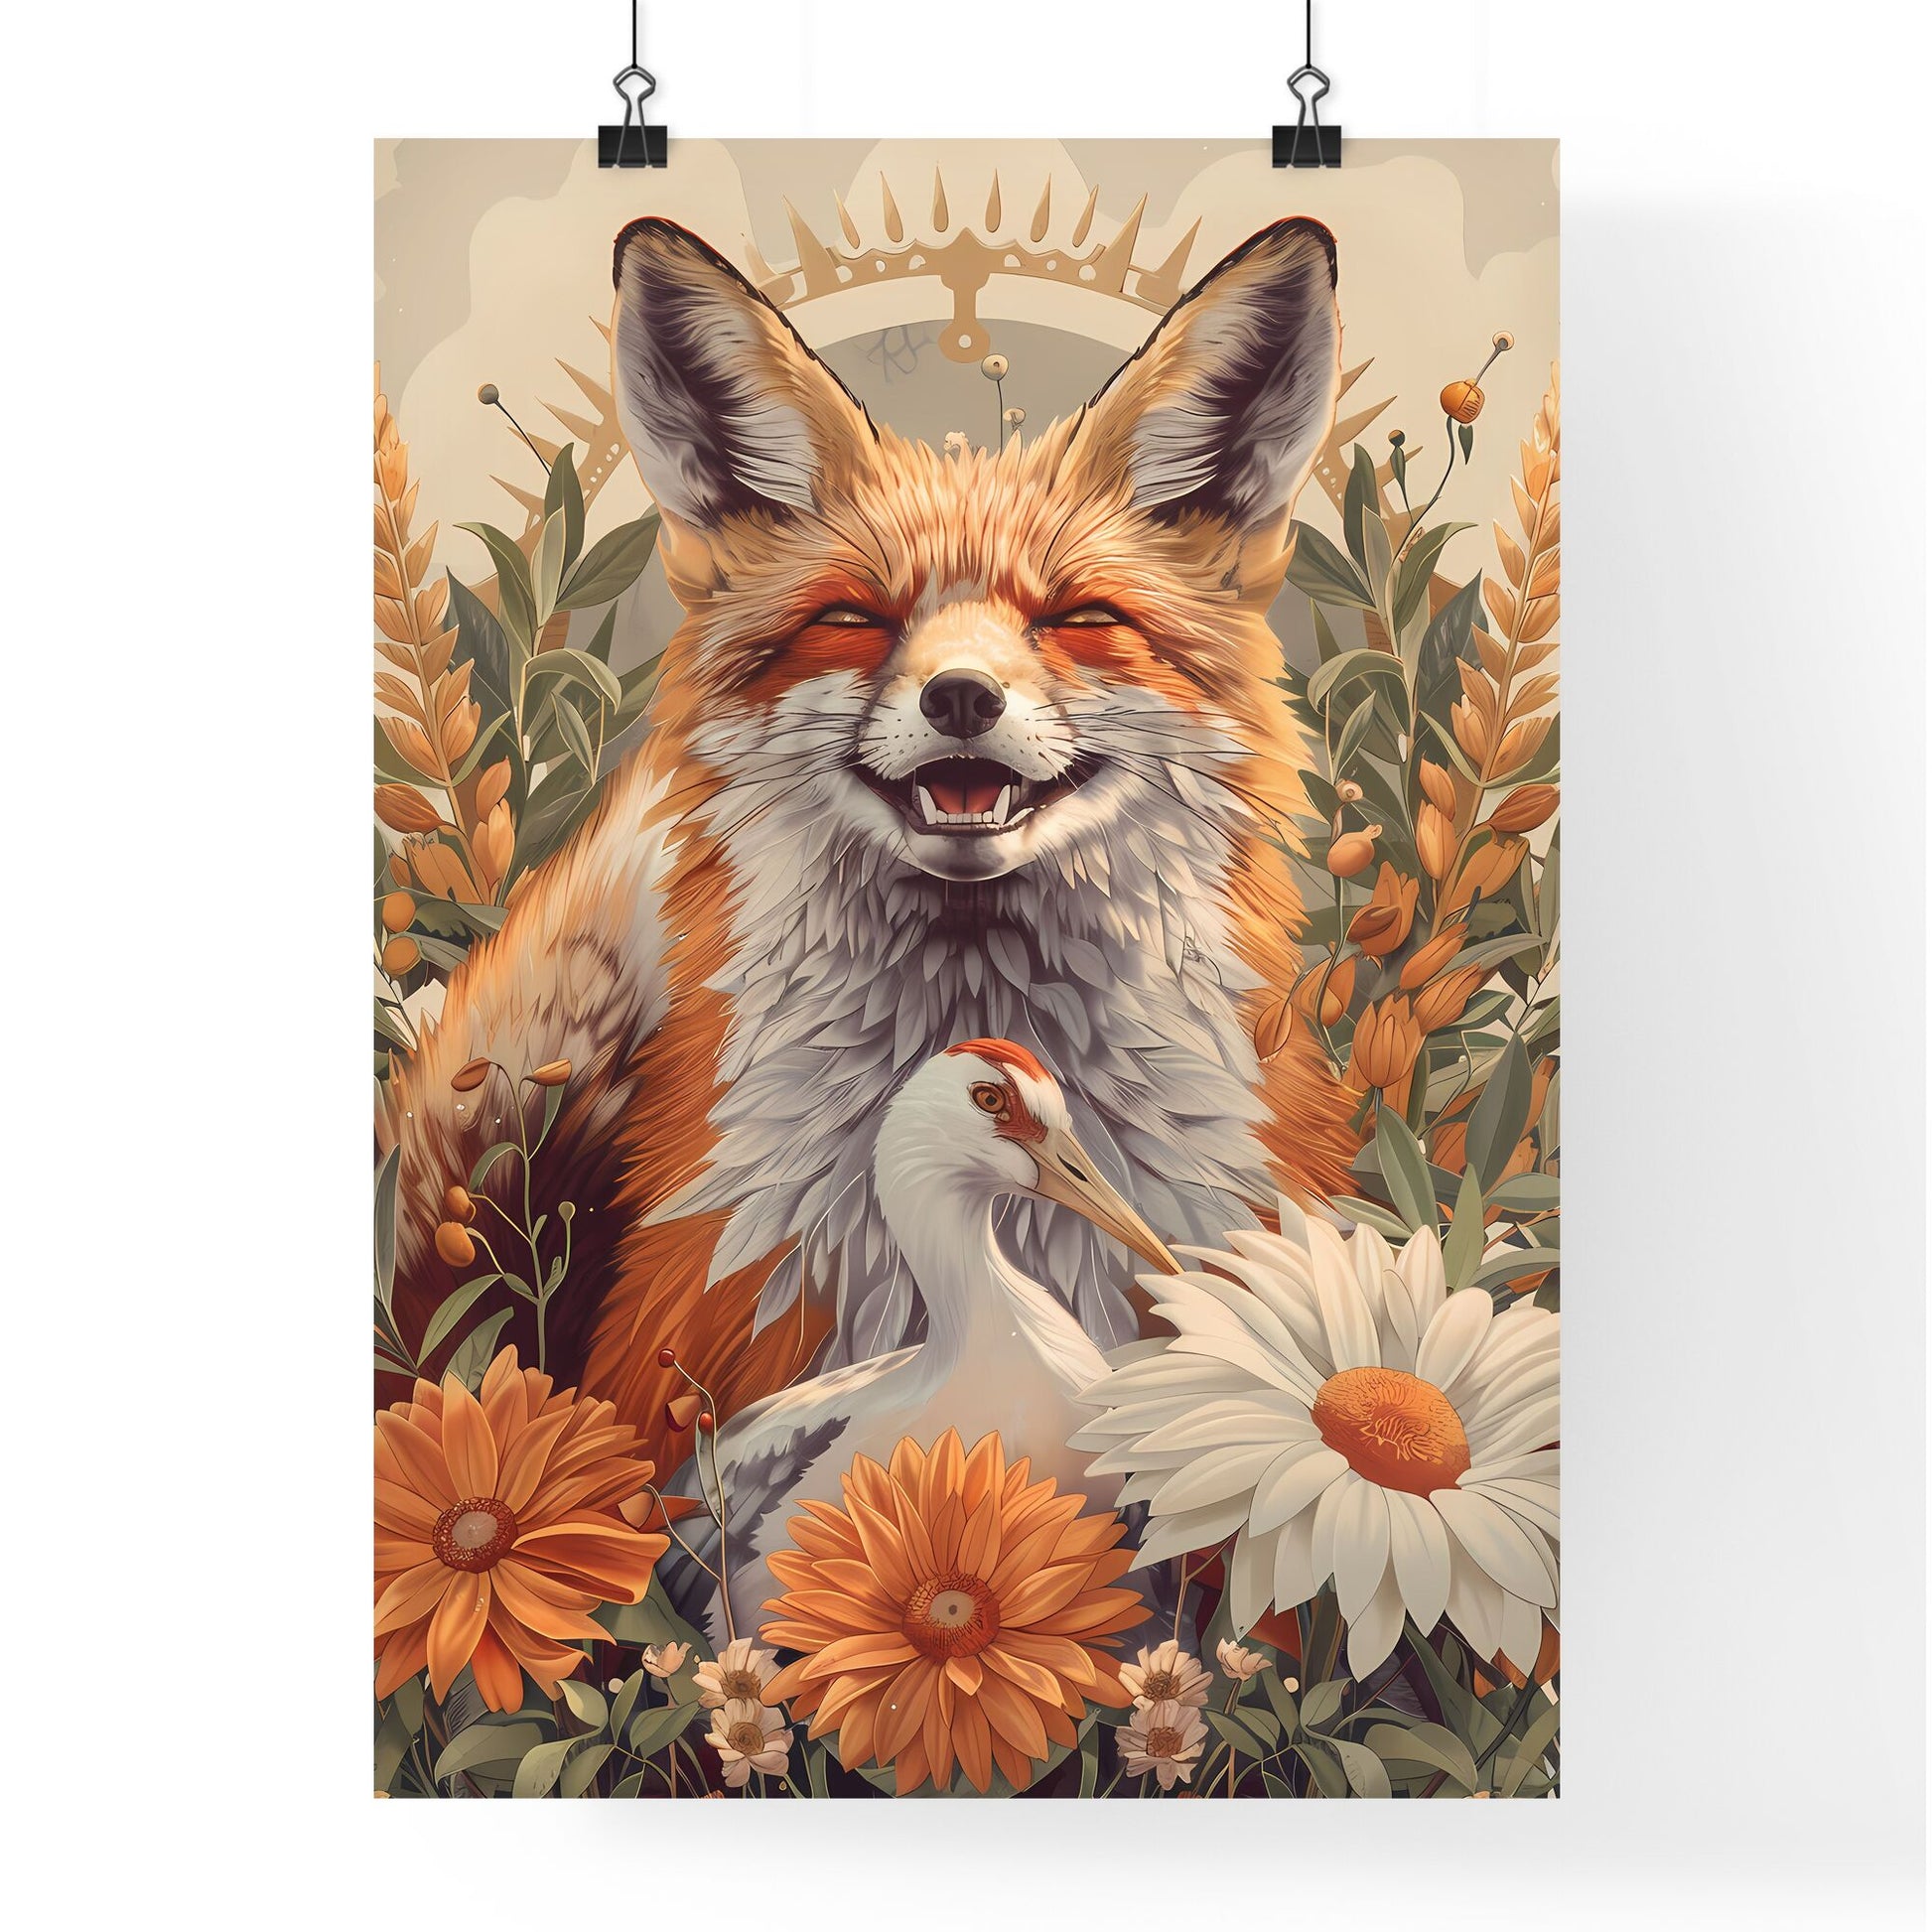 Mesmerizing Watercolor Fox and Crane Adorned with Vibrant Botanicals in Macabre Sublime Style Default Title